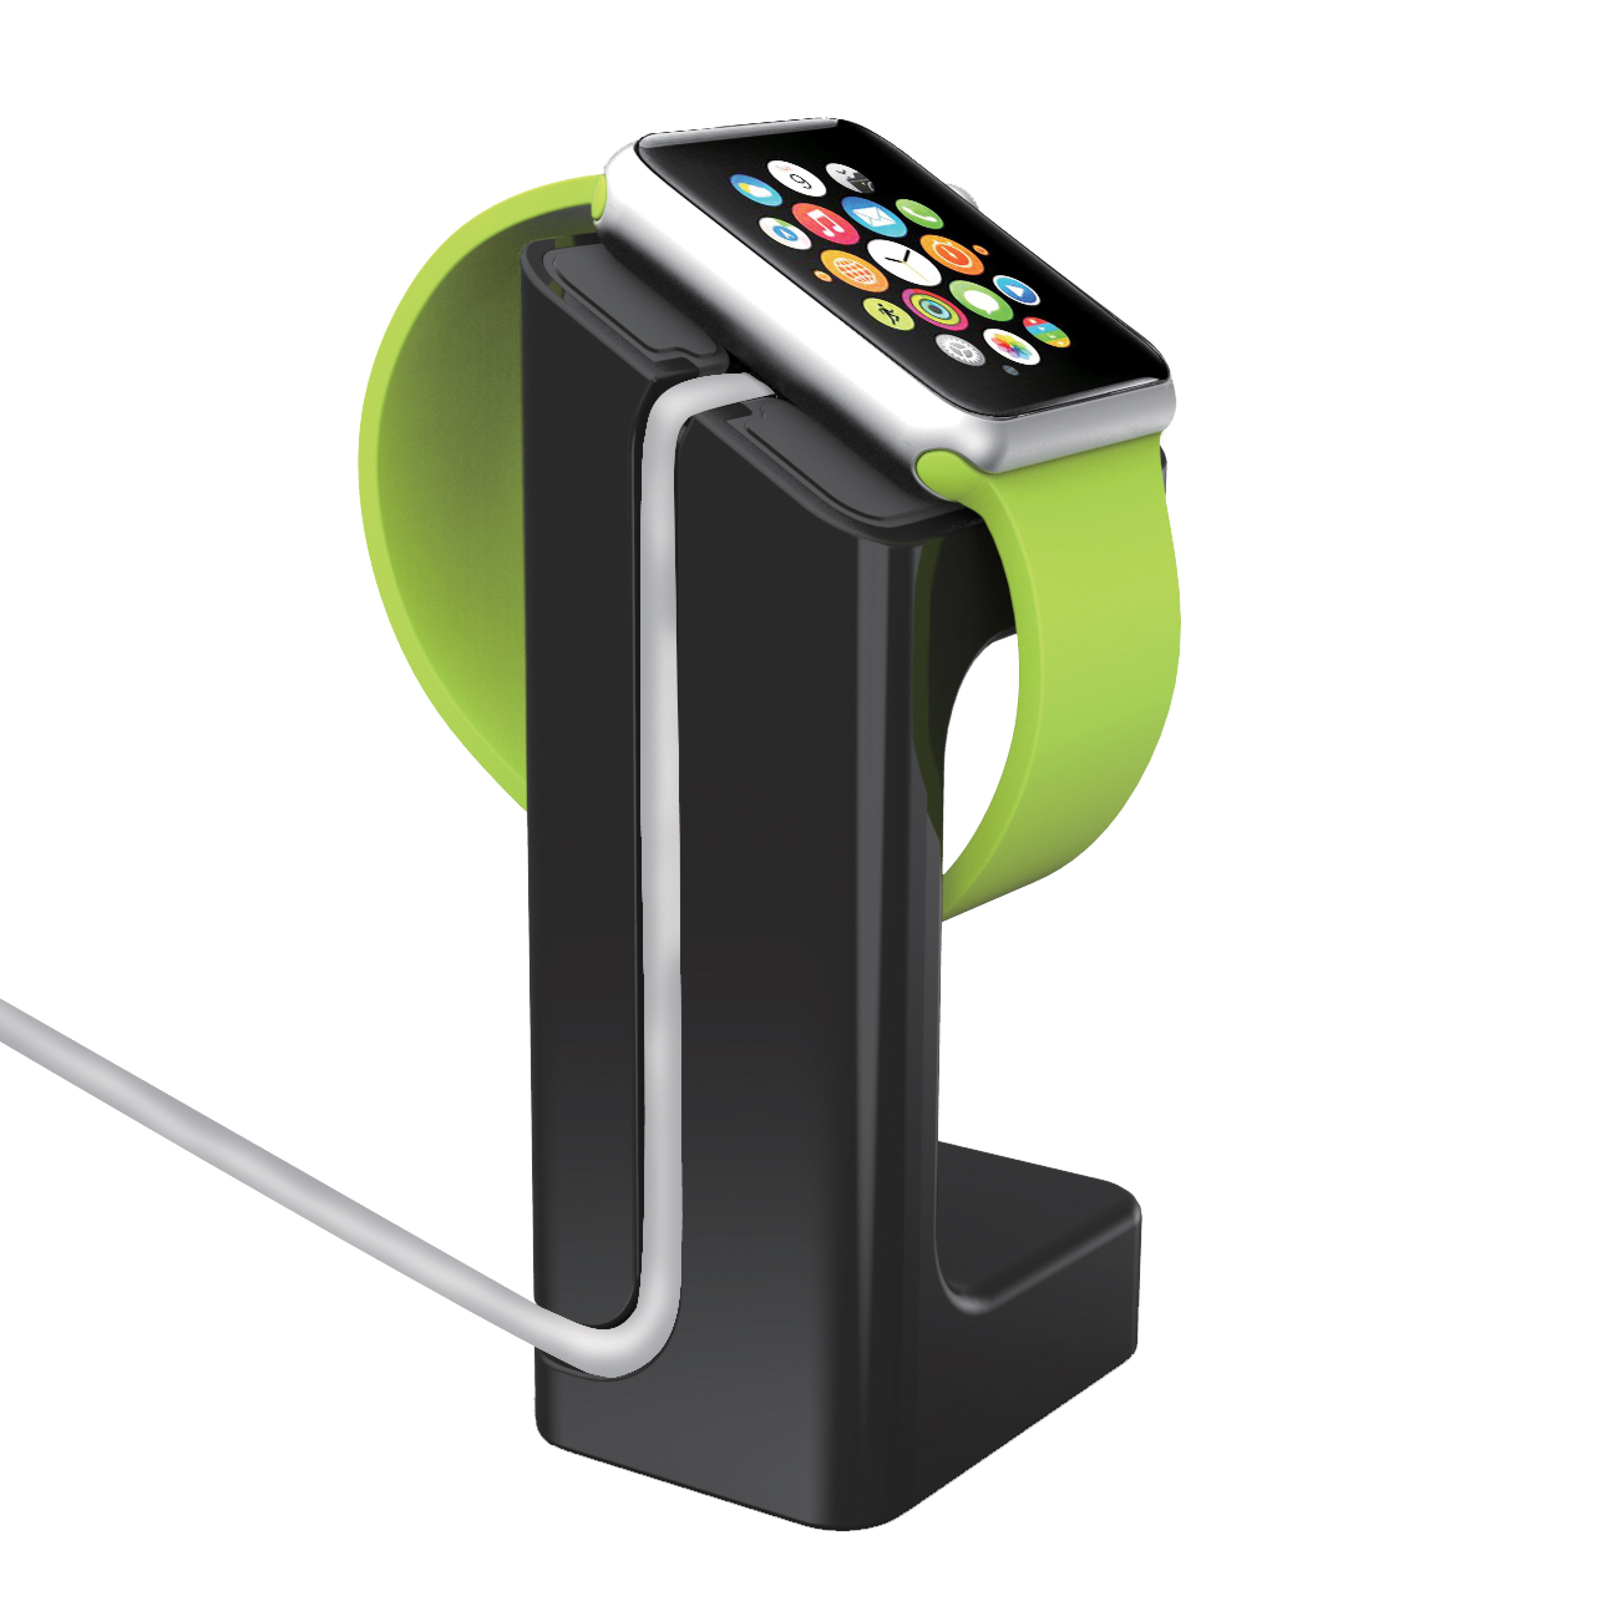 Yousave Accessories Apple Watch Charging Stand - Black